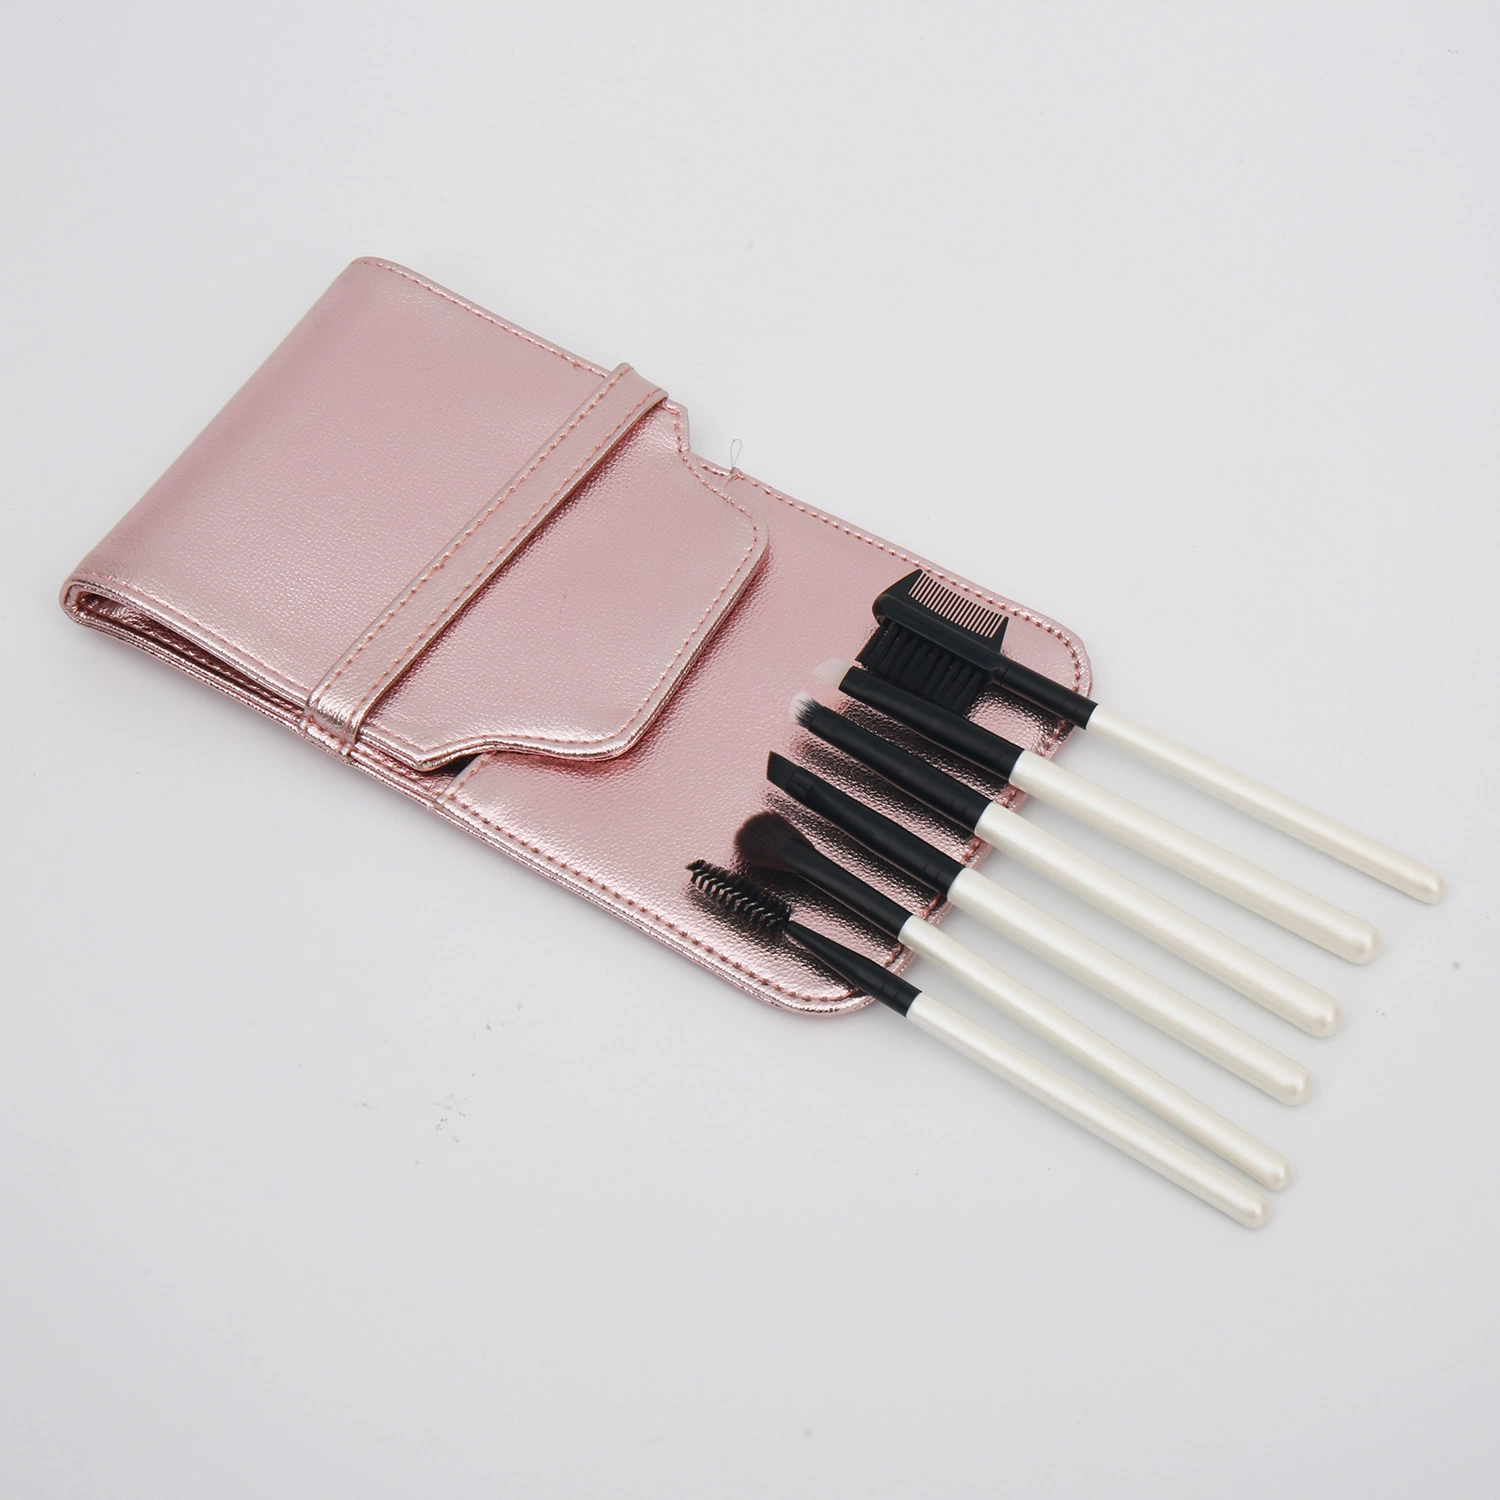 Cosmetics 8PCS Professional Tools Makeup Brushes with Brush Pouch